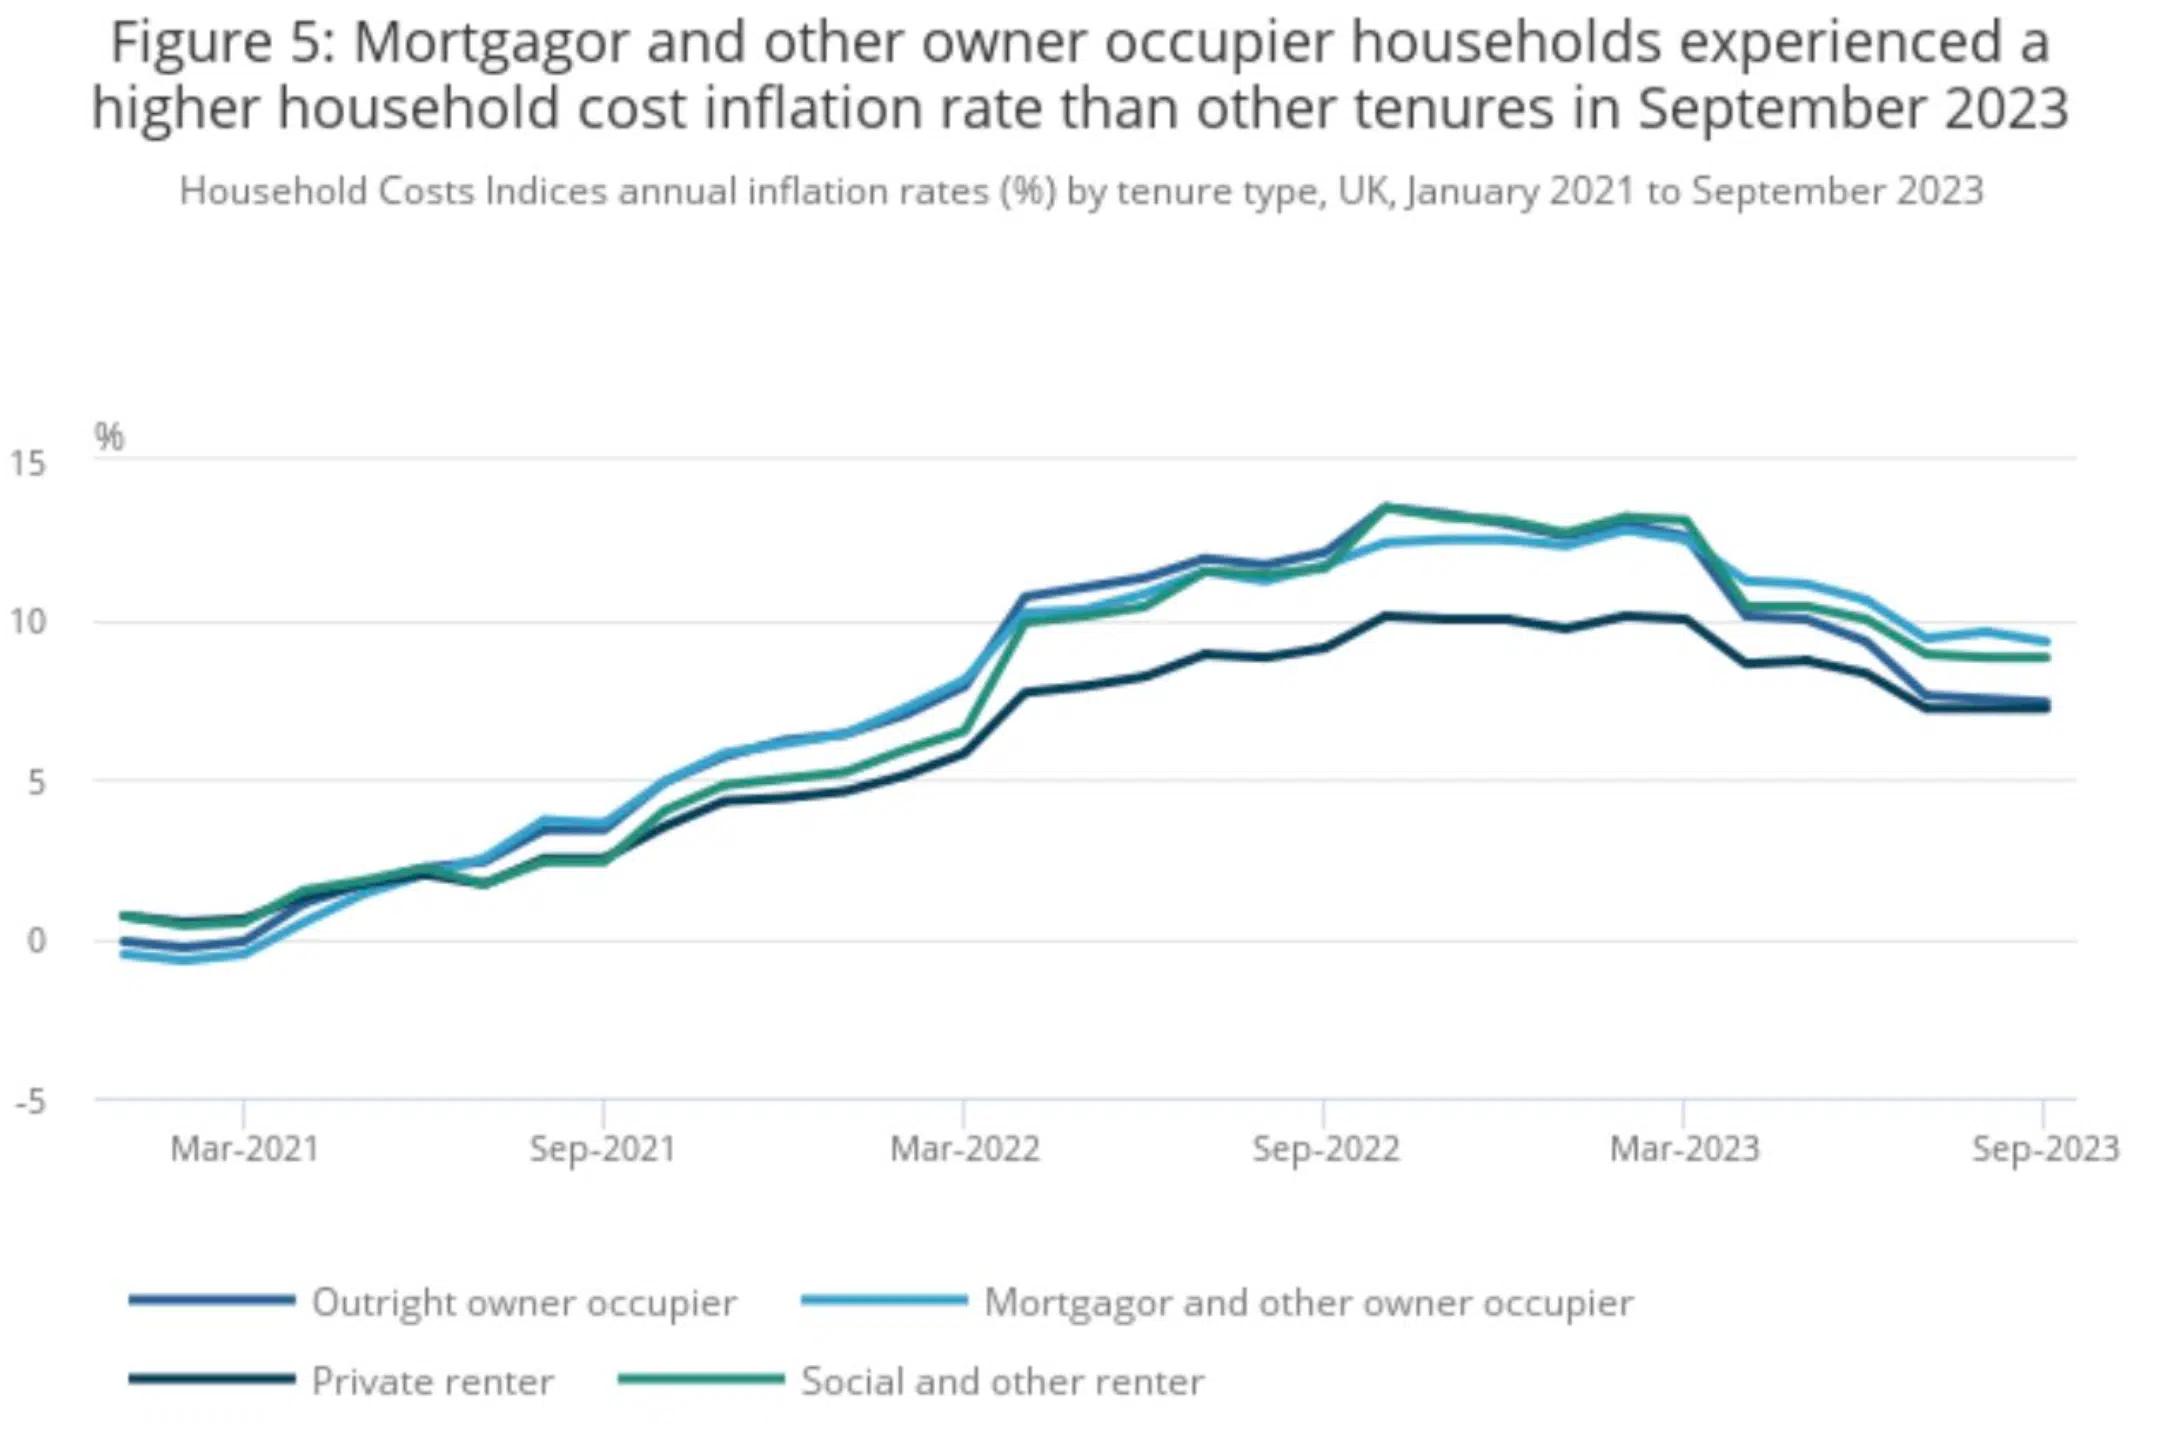 Mortgagor and other owner occupier households experienced a higher household cost inflation rate than other tenures in September 2023